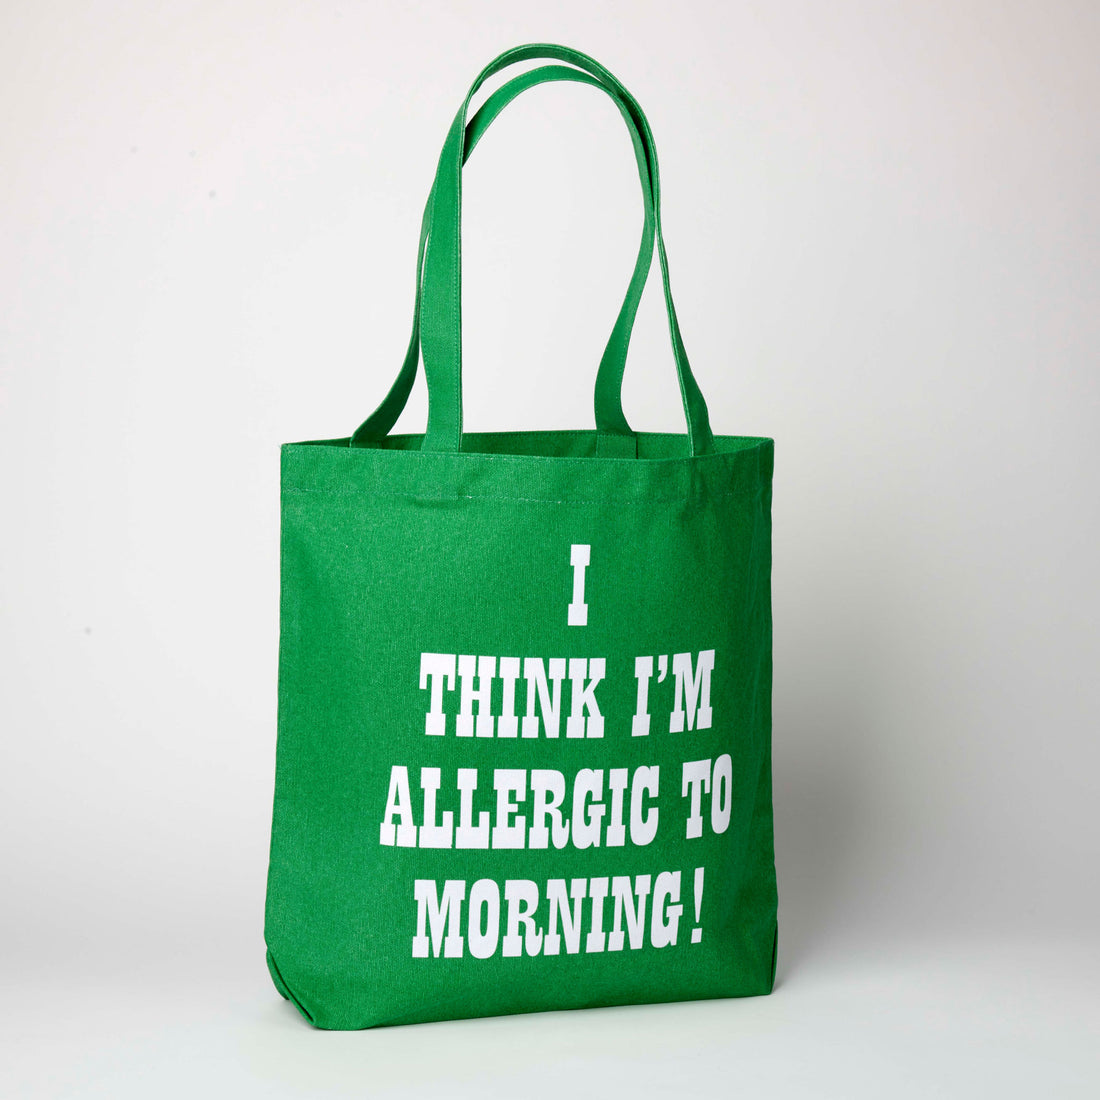 Peanuts Tote - Allergic to Mornings